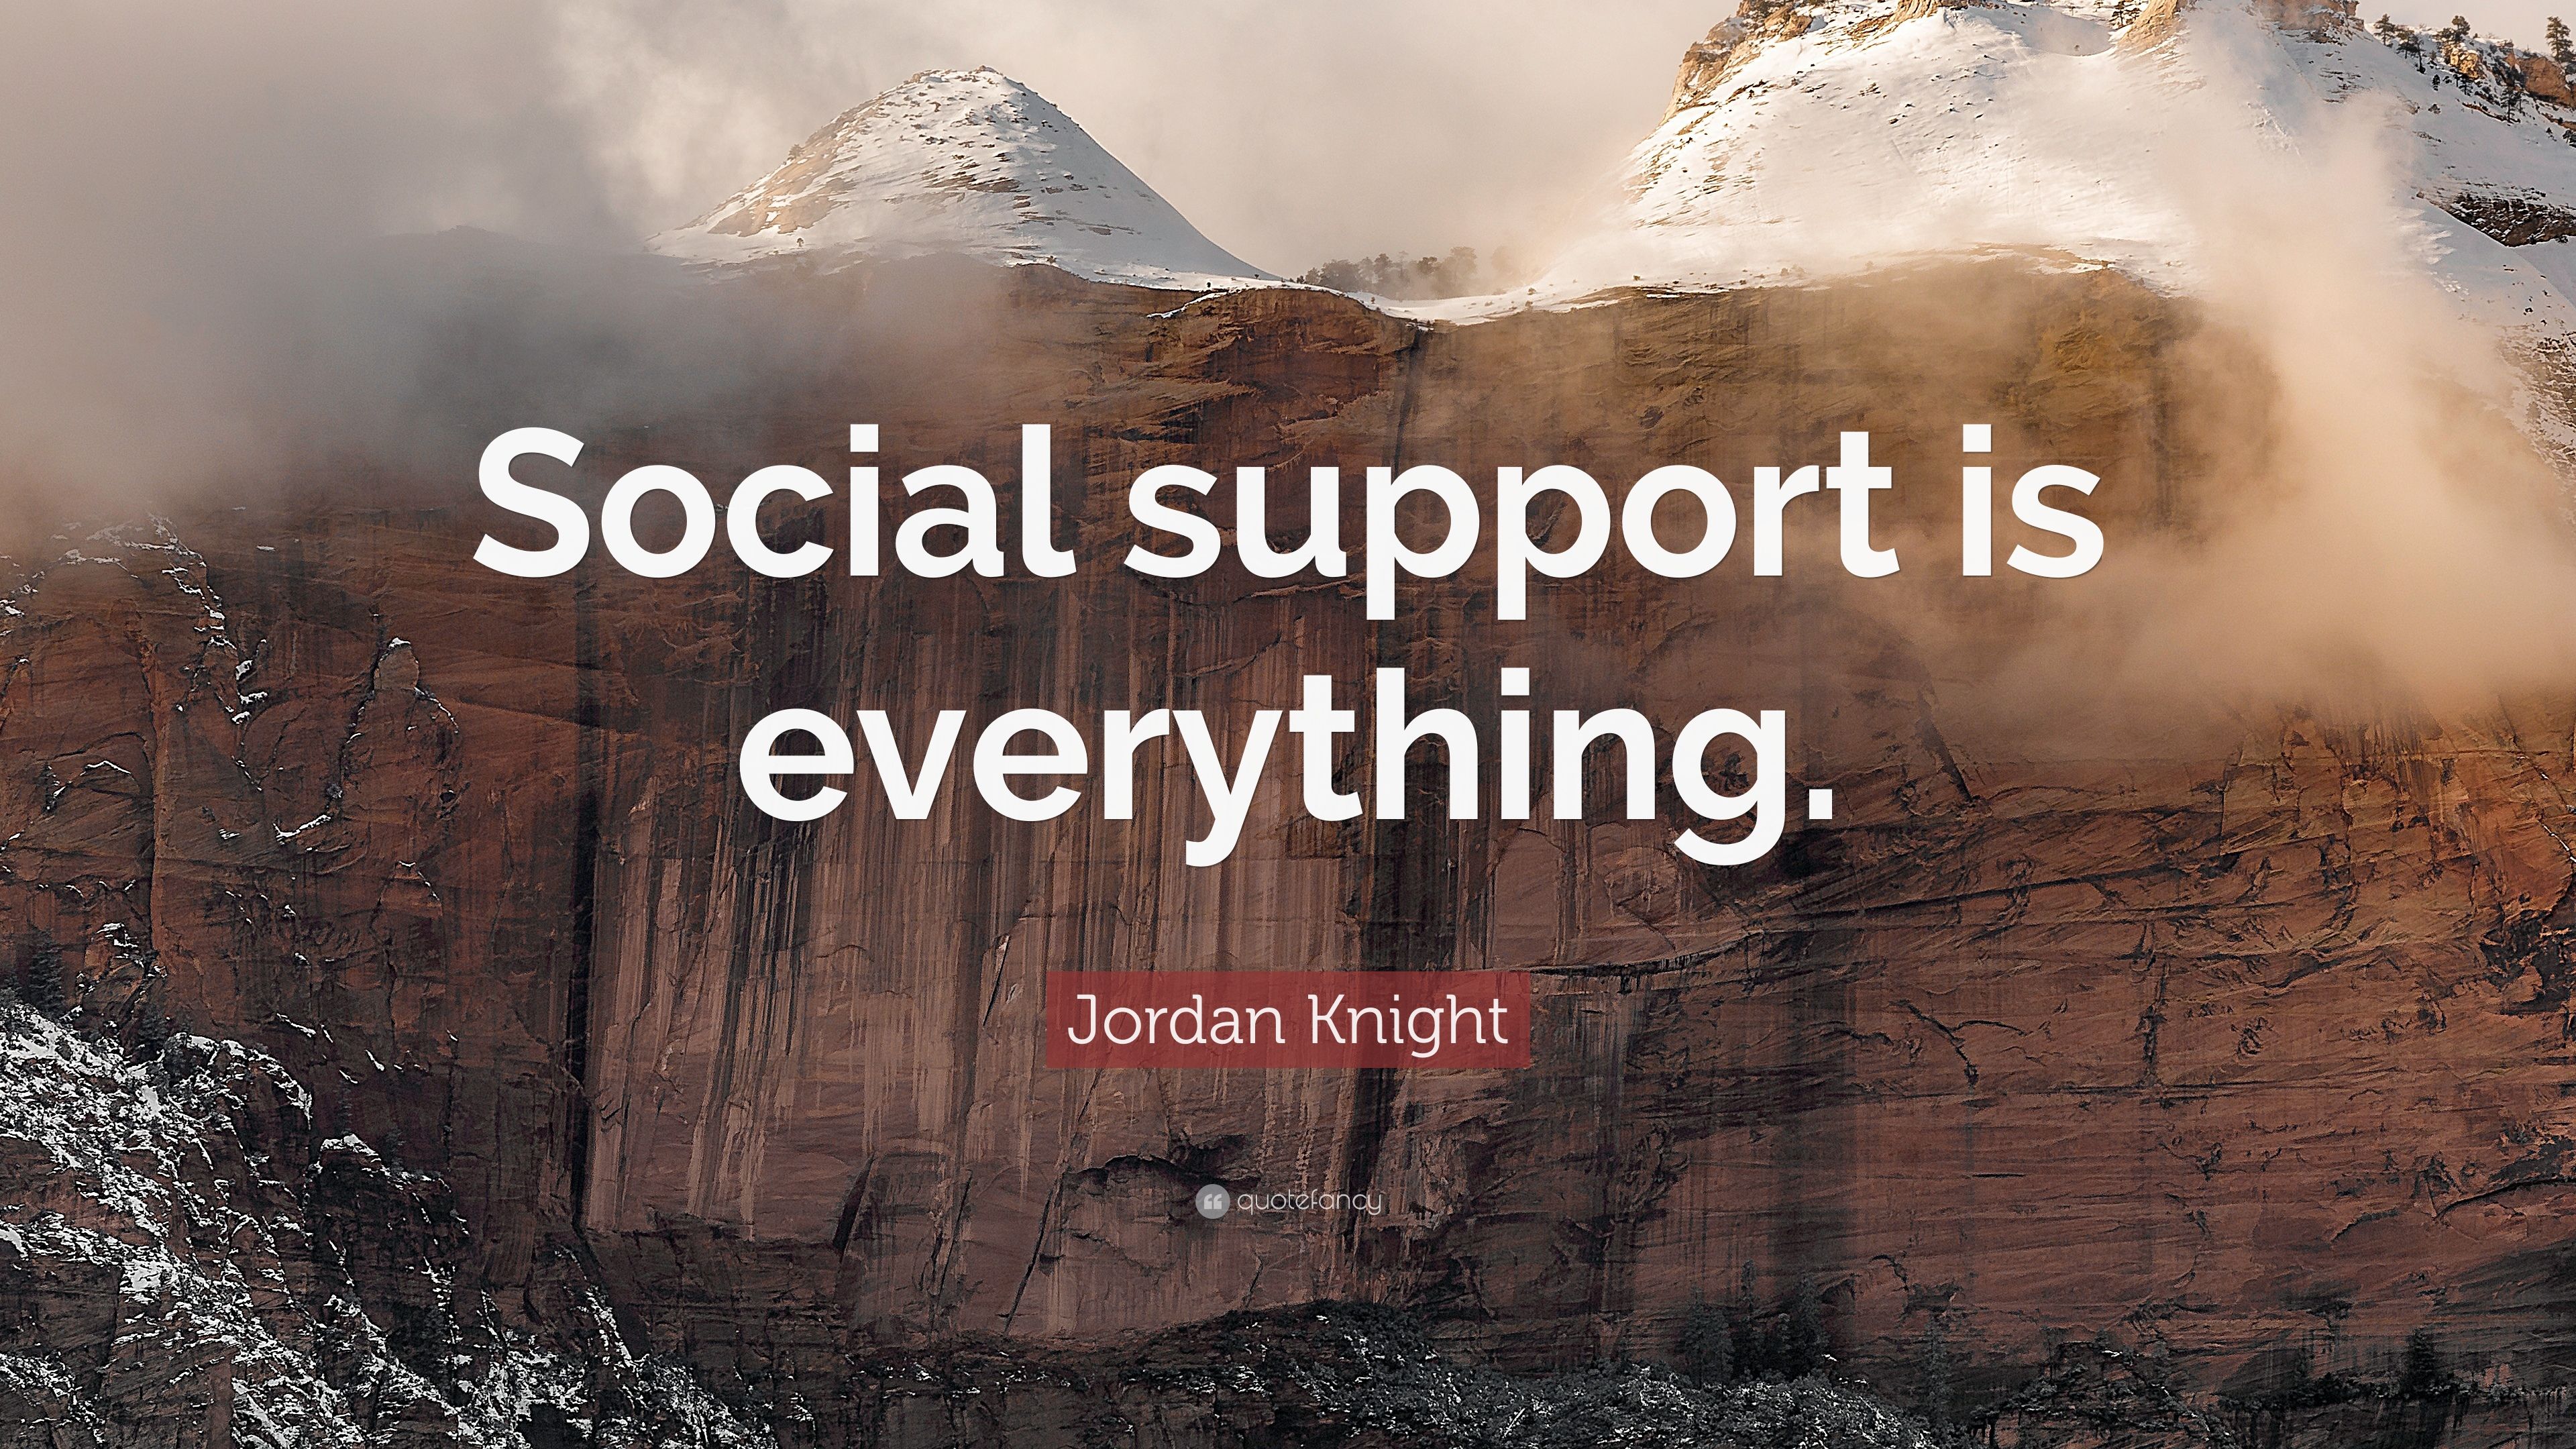 Jordan Knight Quote: “Social support is everything.” 10 wallpaper